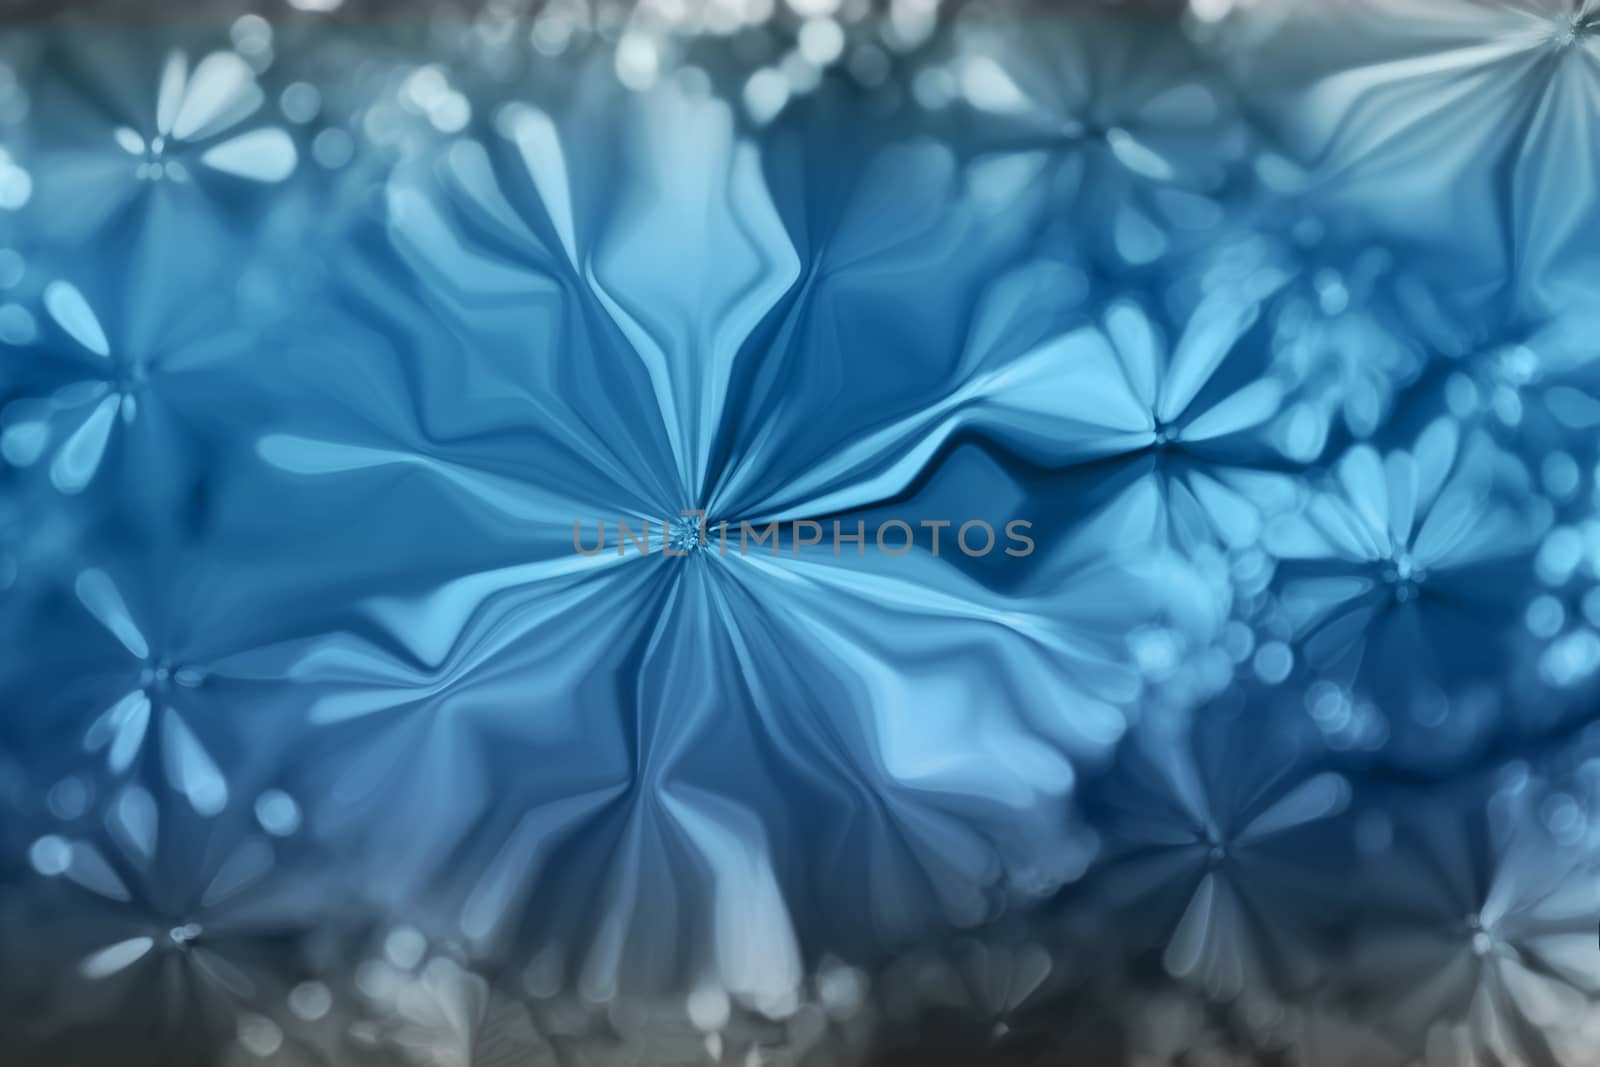 Colourful spark and blow lovely fantasy mood abstract sweet cheerful millennium blue background